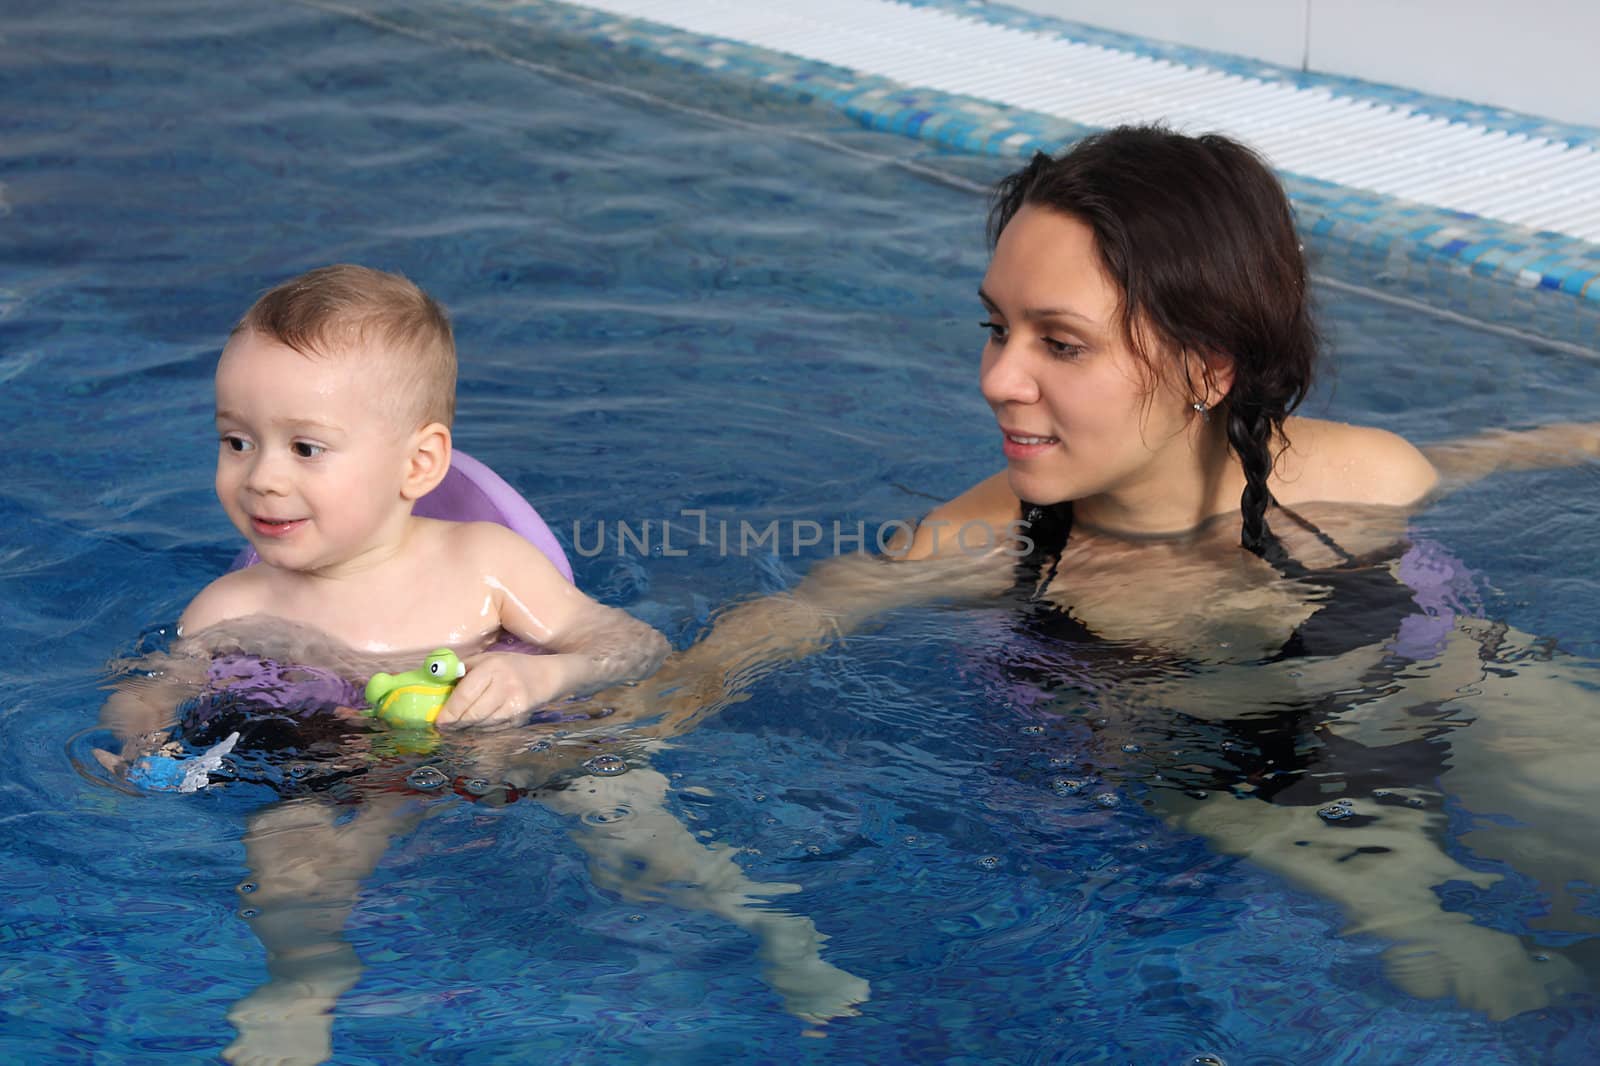 Mum with the son bathe in pool